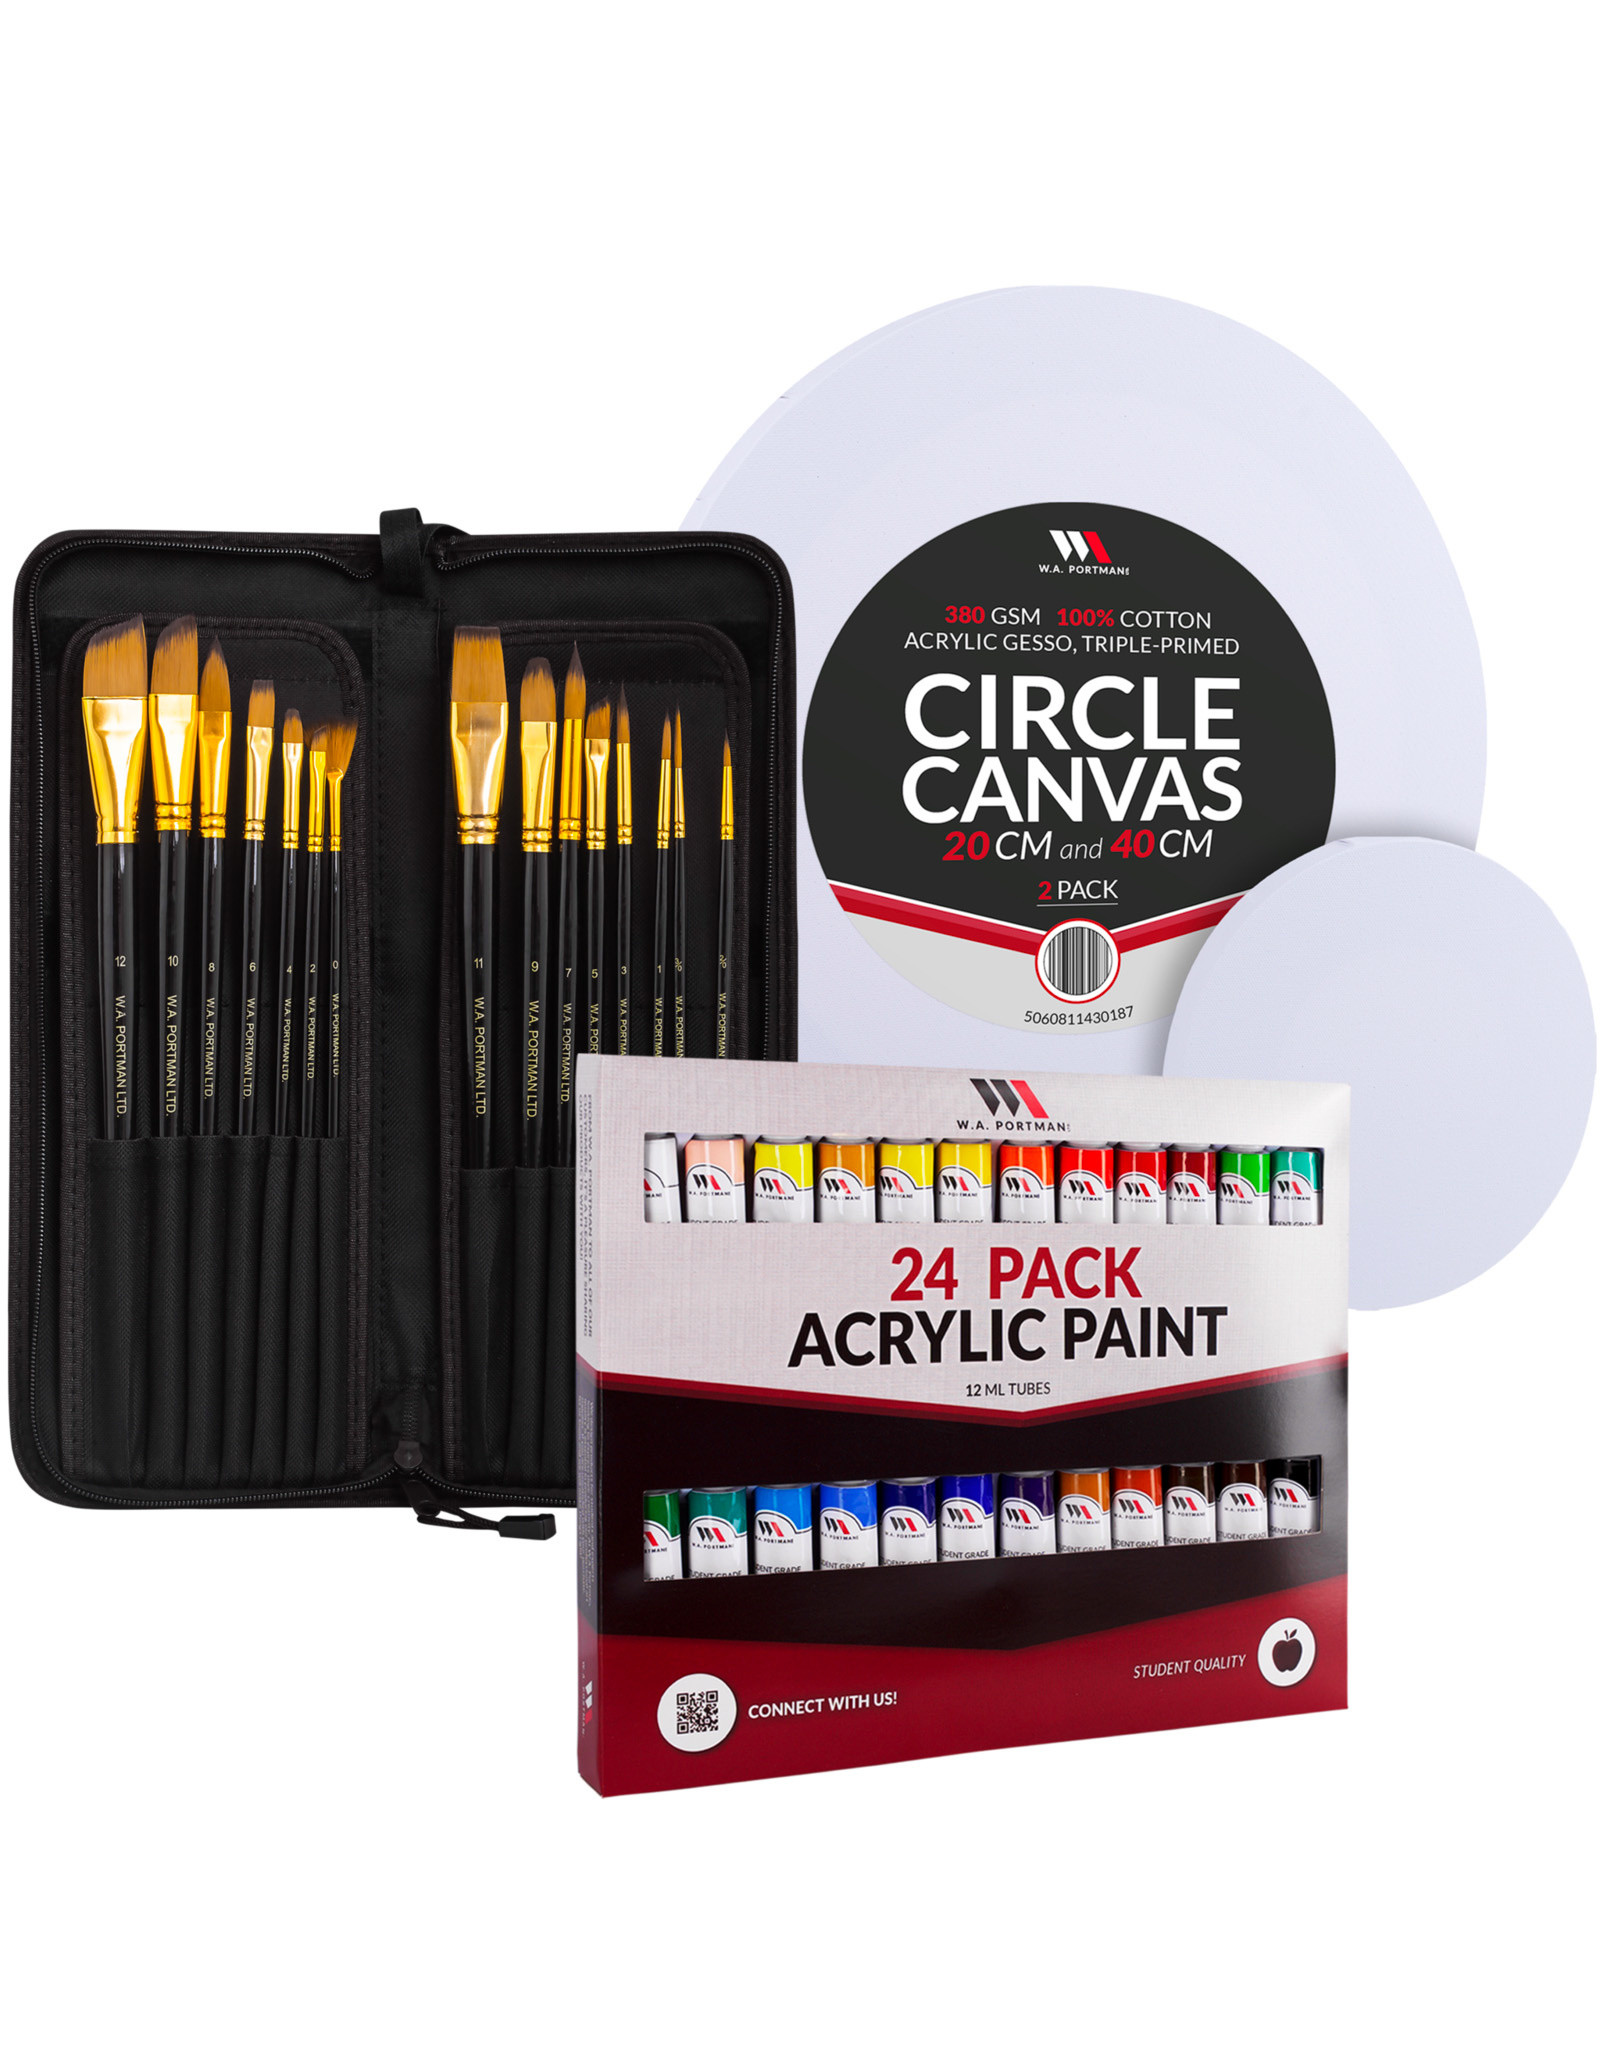 WA Portman Circle Canvas Painting Kit - The Art Store/Commercial